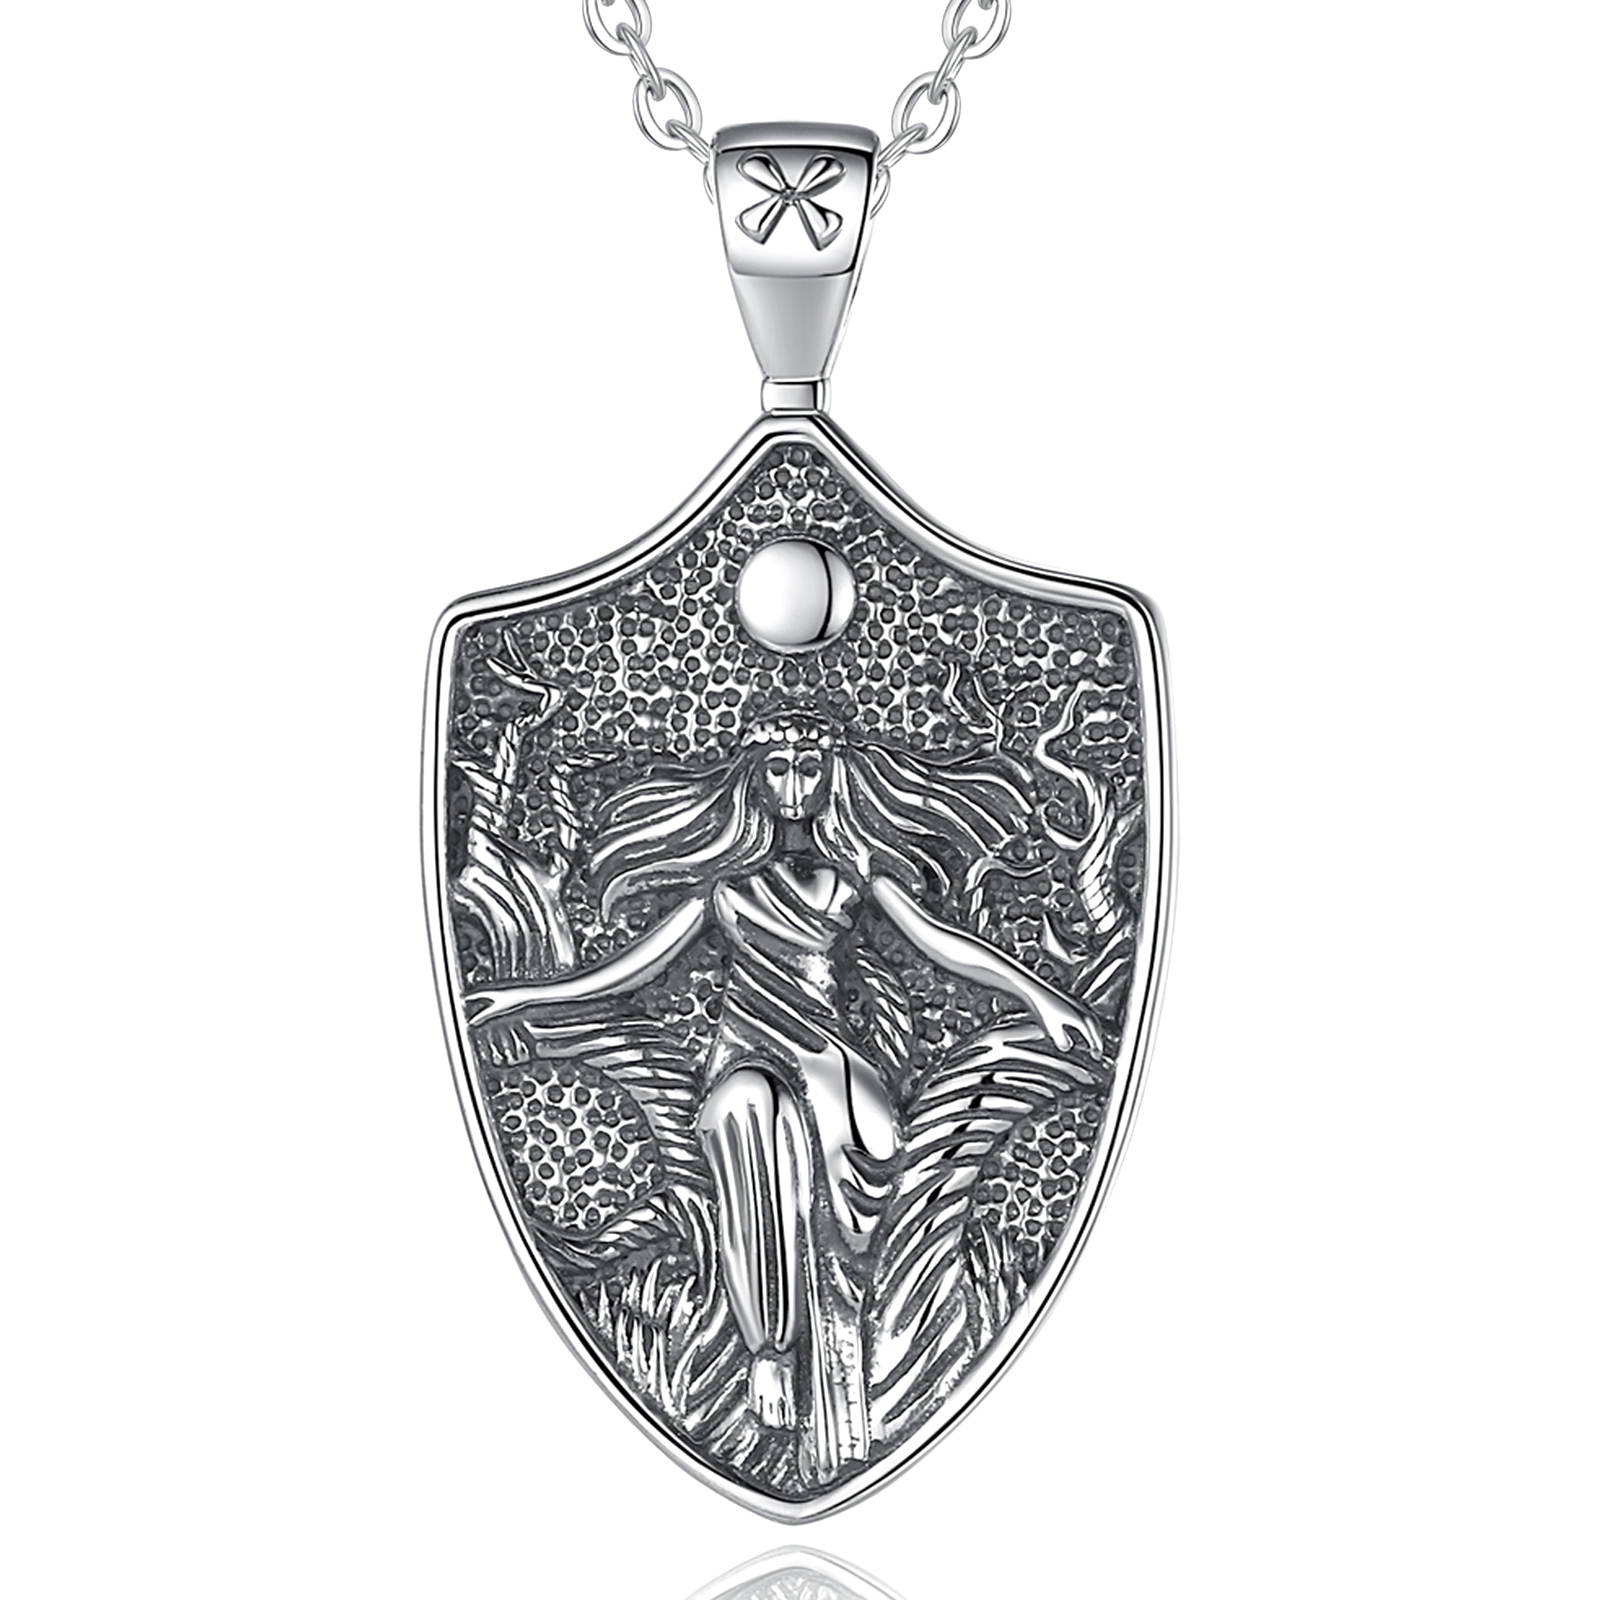 Merryshine Vintage Micro Back Embossing S925 Sterling Silver Moon Goddess Medal Necklace